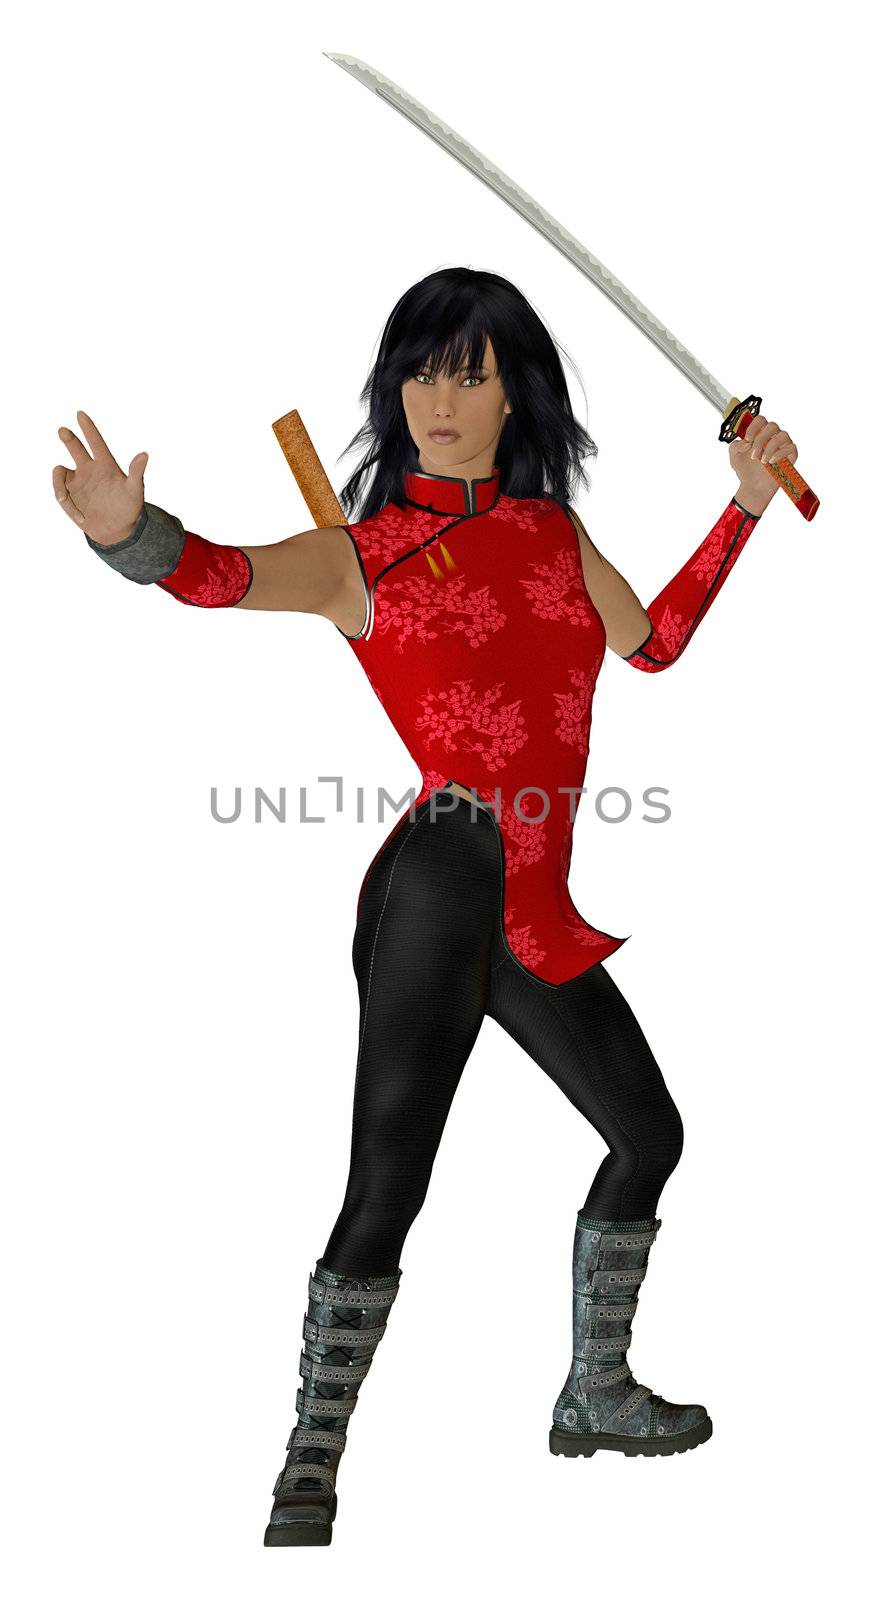 Woman Holding A Sword by kathygold